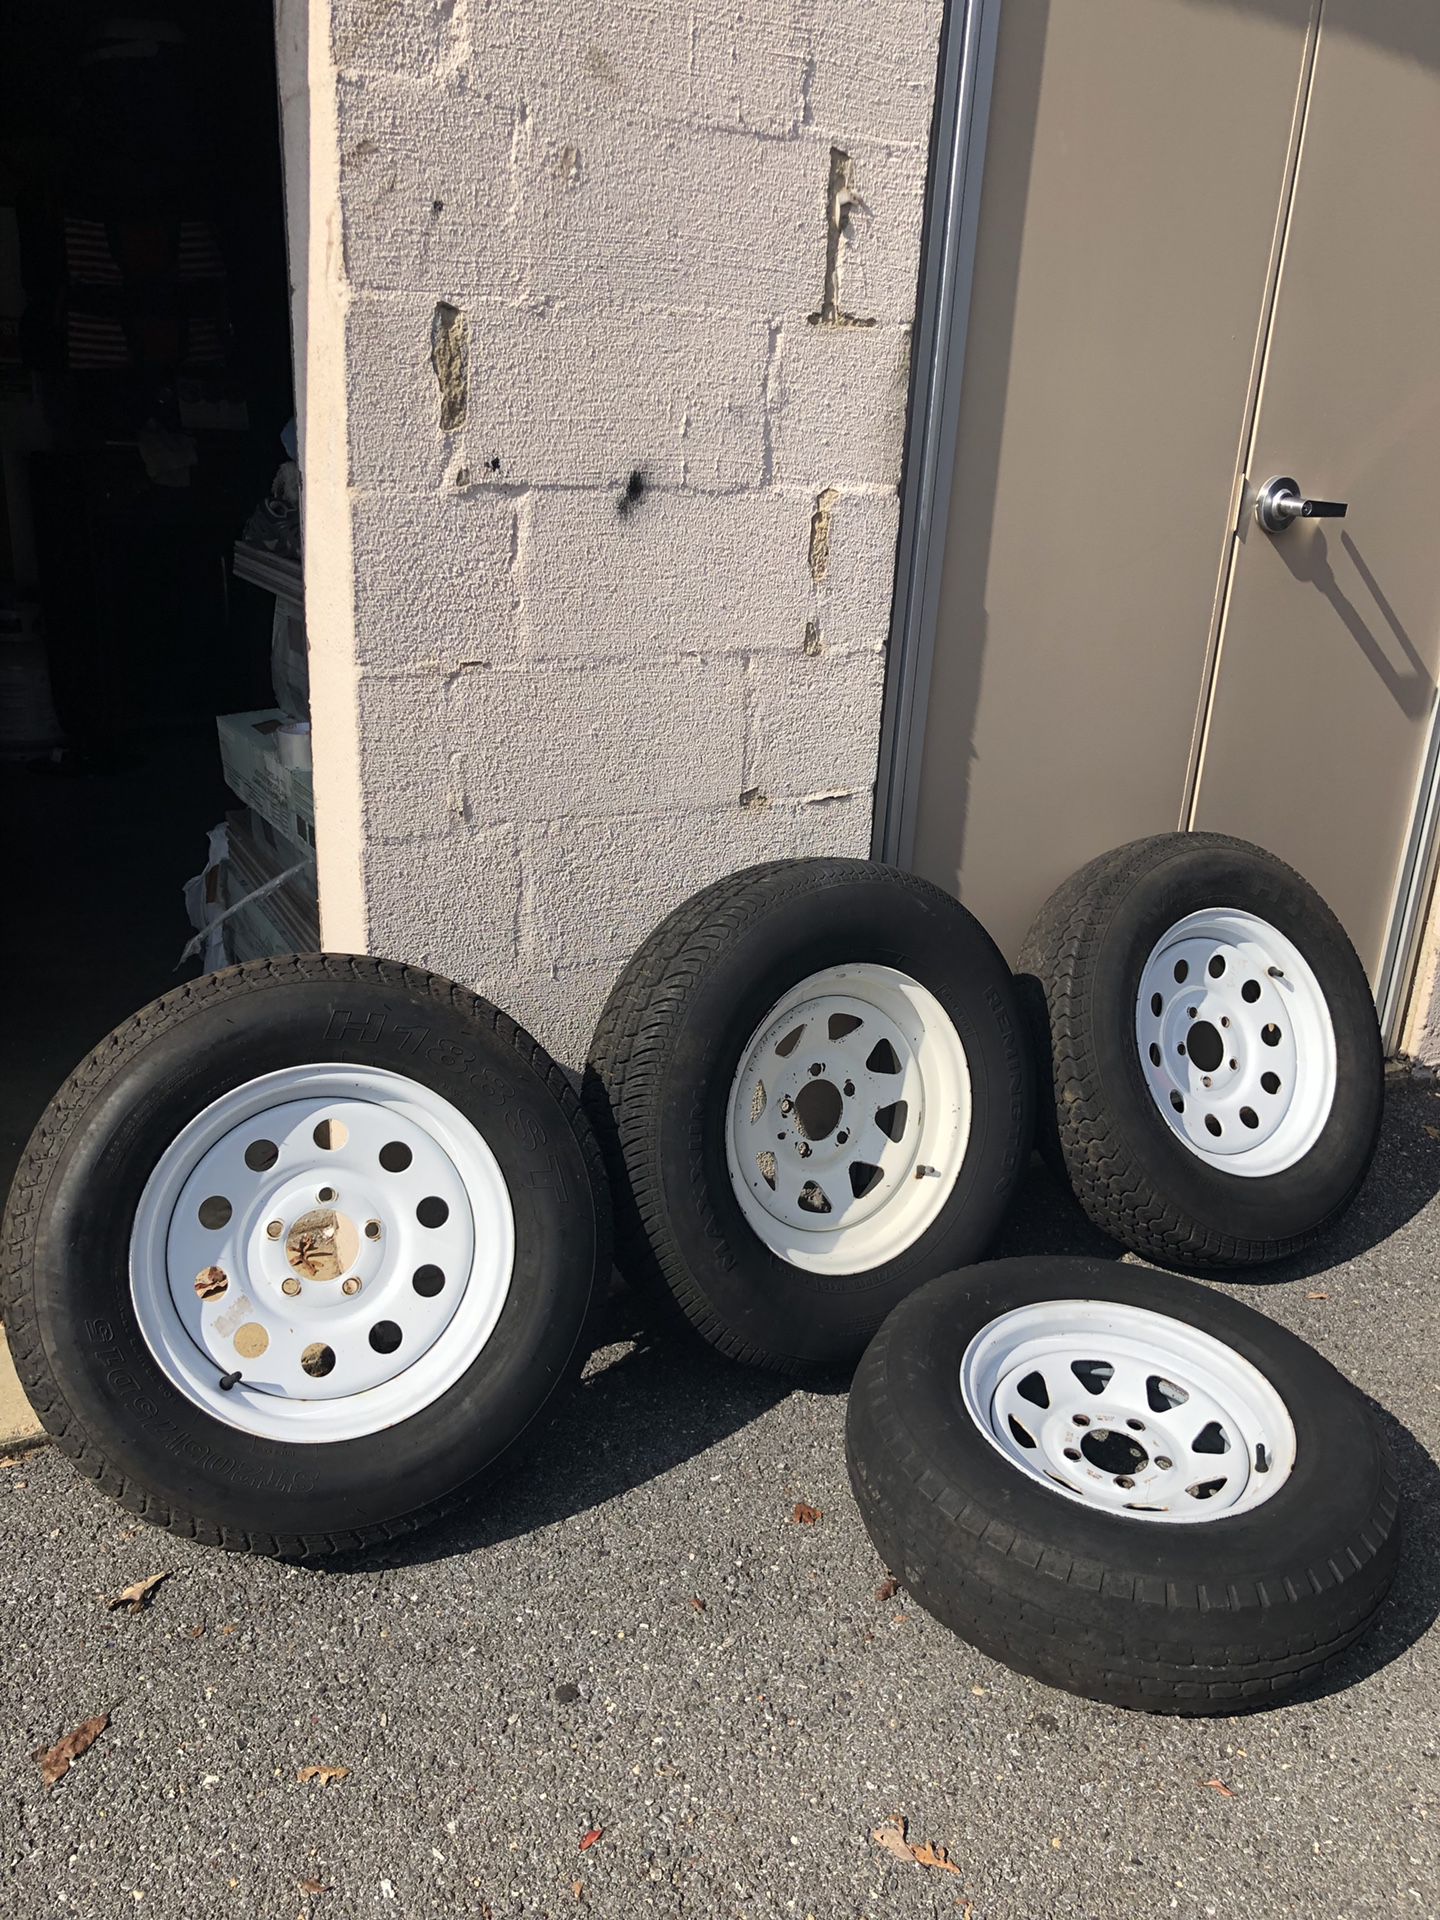 Tires for trailer good condition have 3 tire and rings #15 and 1 #14 price for ring end tires #14 is $90